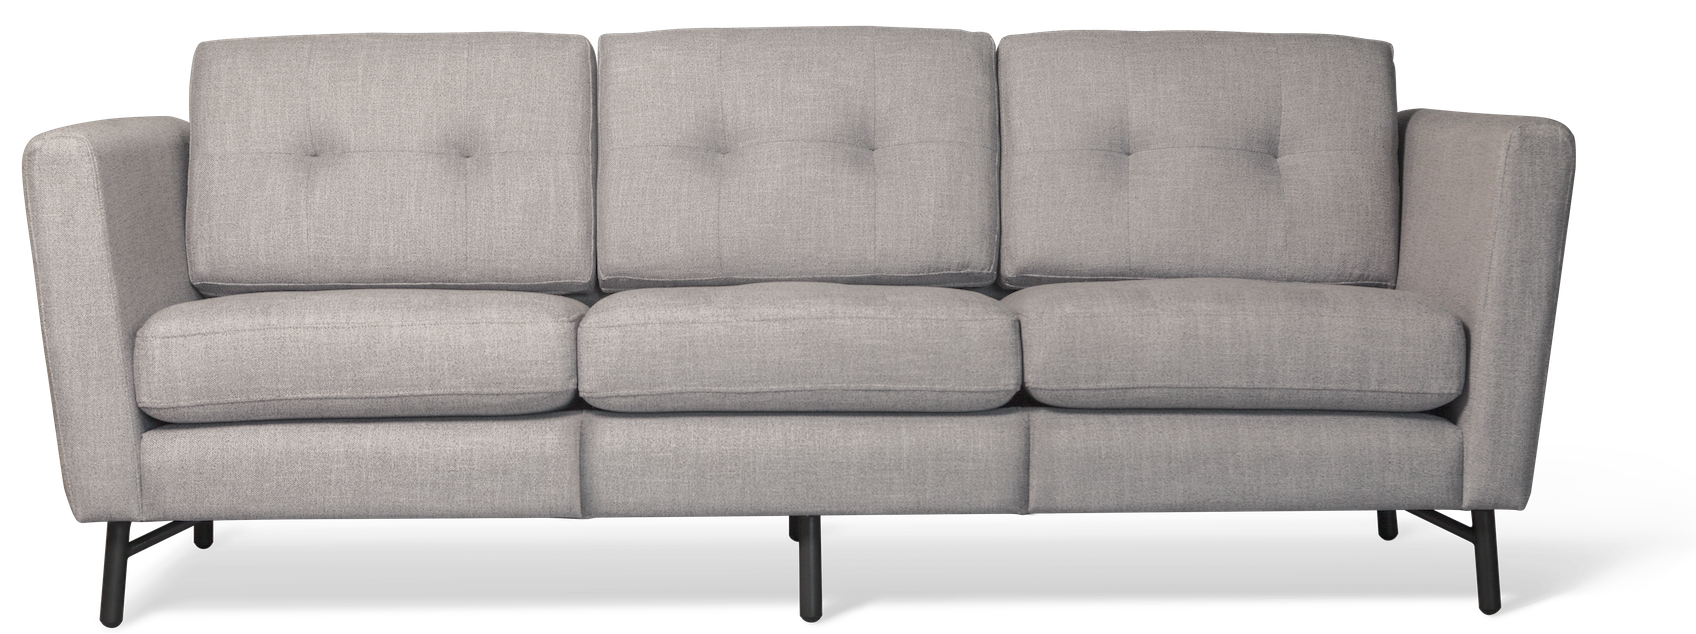 Couch PNG Clipart Background